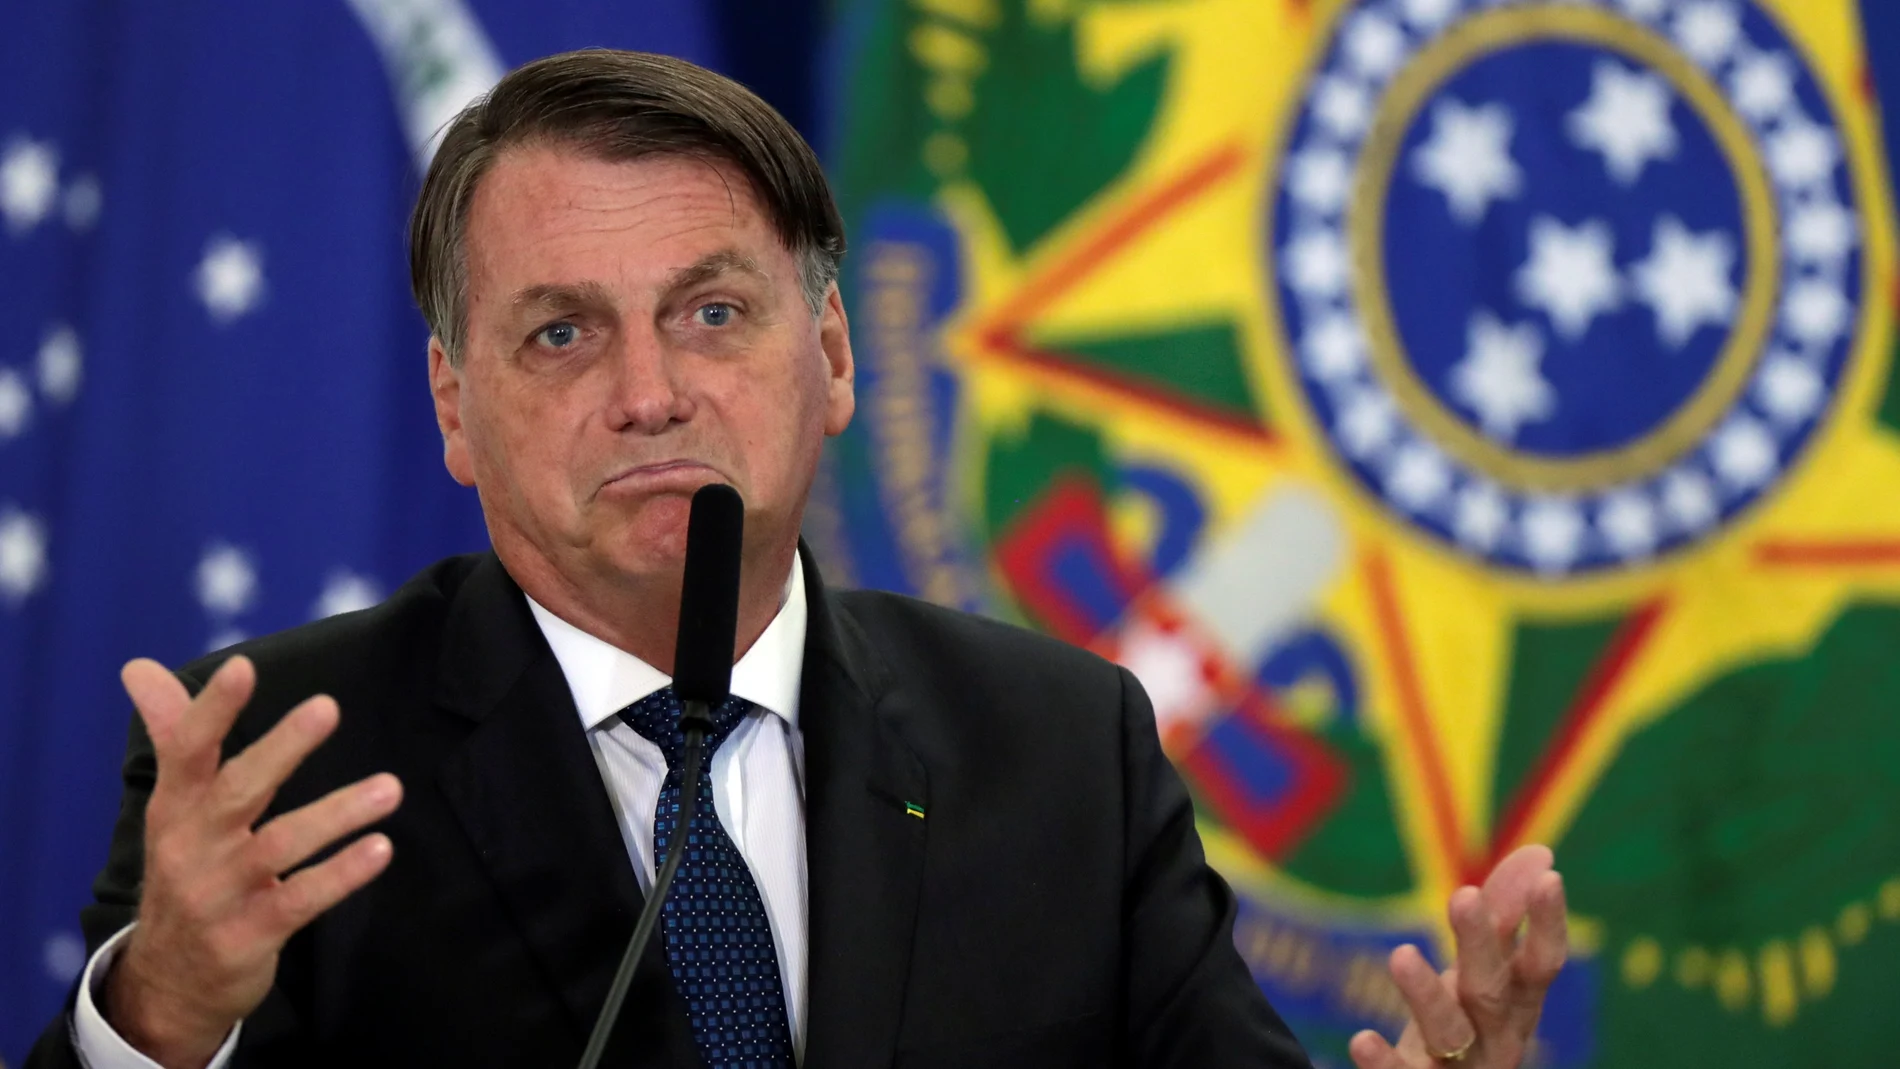 Brazil's President Jair Bolsonaro gestures during the inauguration ceremony of the new Tourism Minister Gilson Machado, at the Planalto Palace in Brasilia, Brazil, December 17, 2020. REUTERS/Ueslei Marcelino